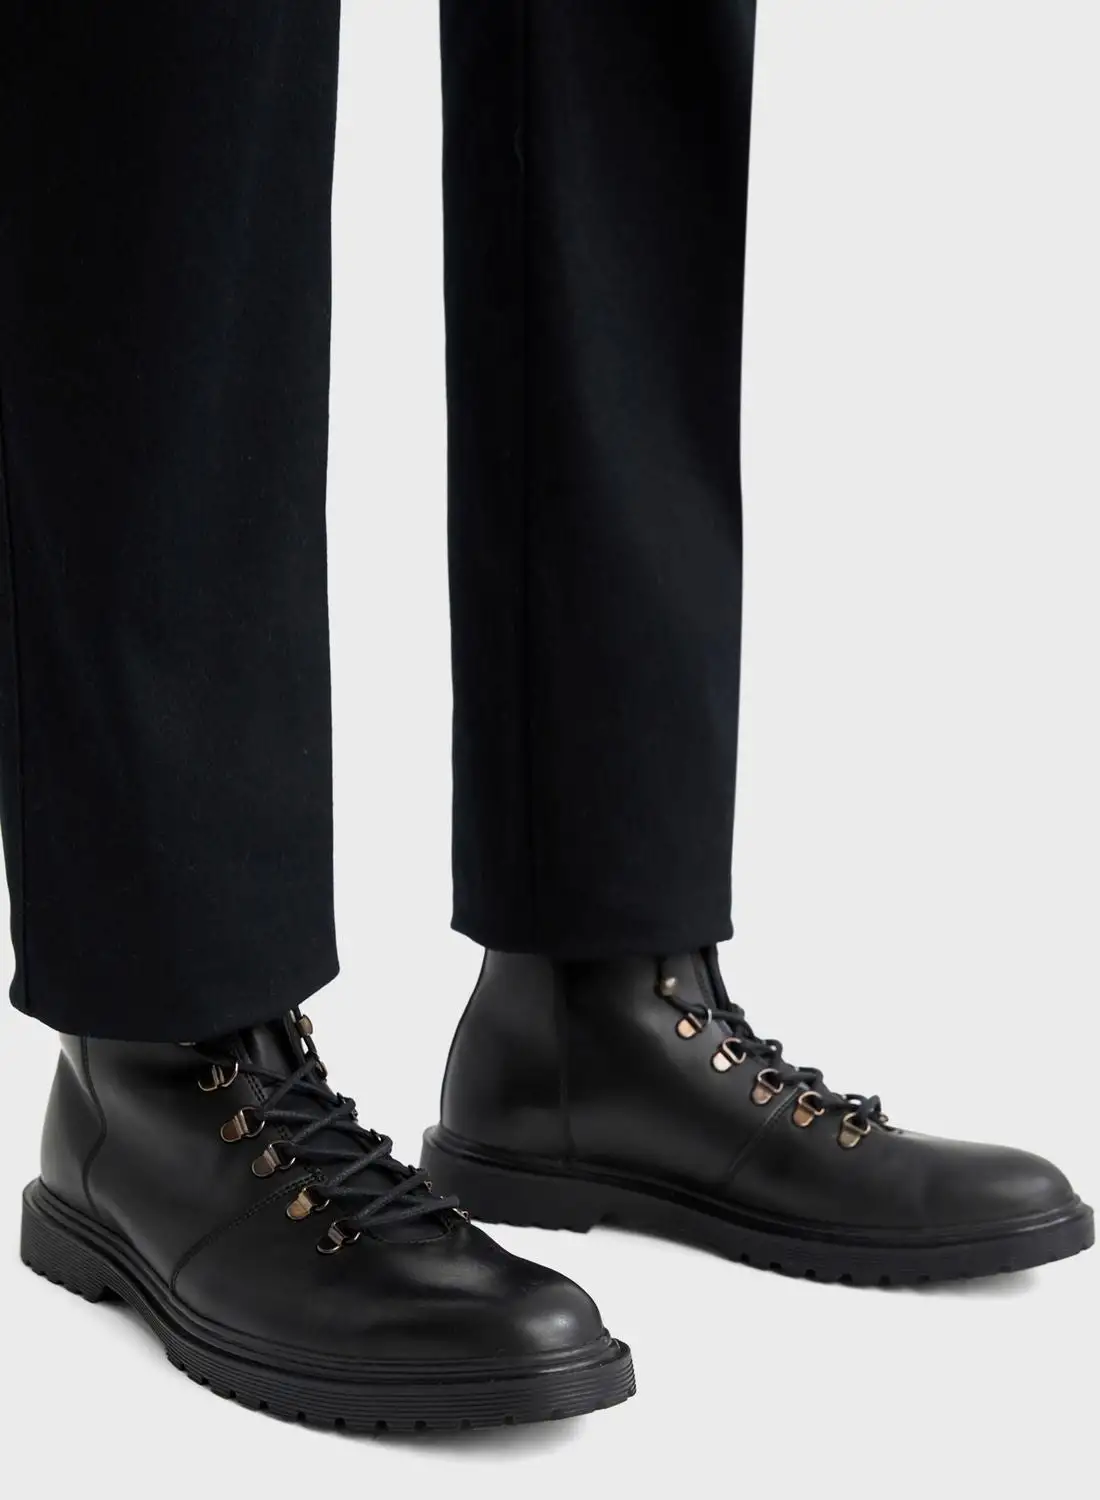 DeFacto High Top Formal Boots